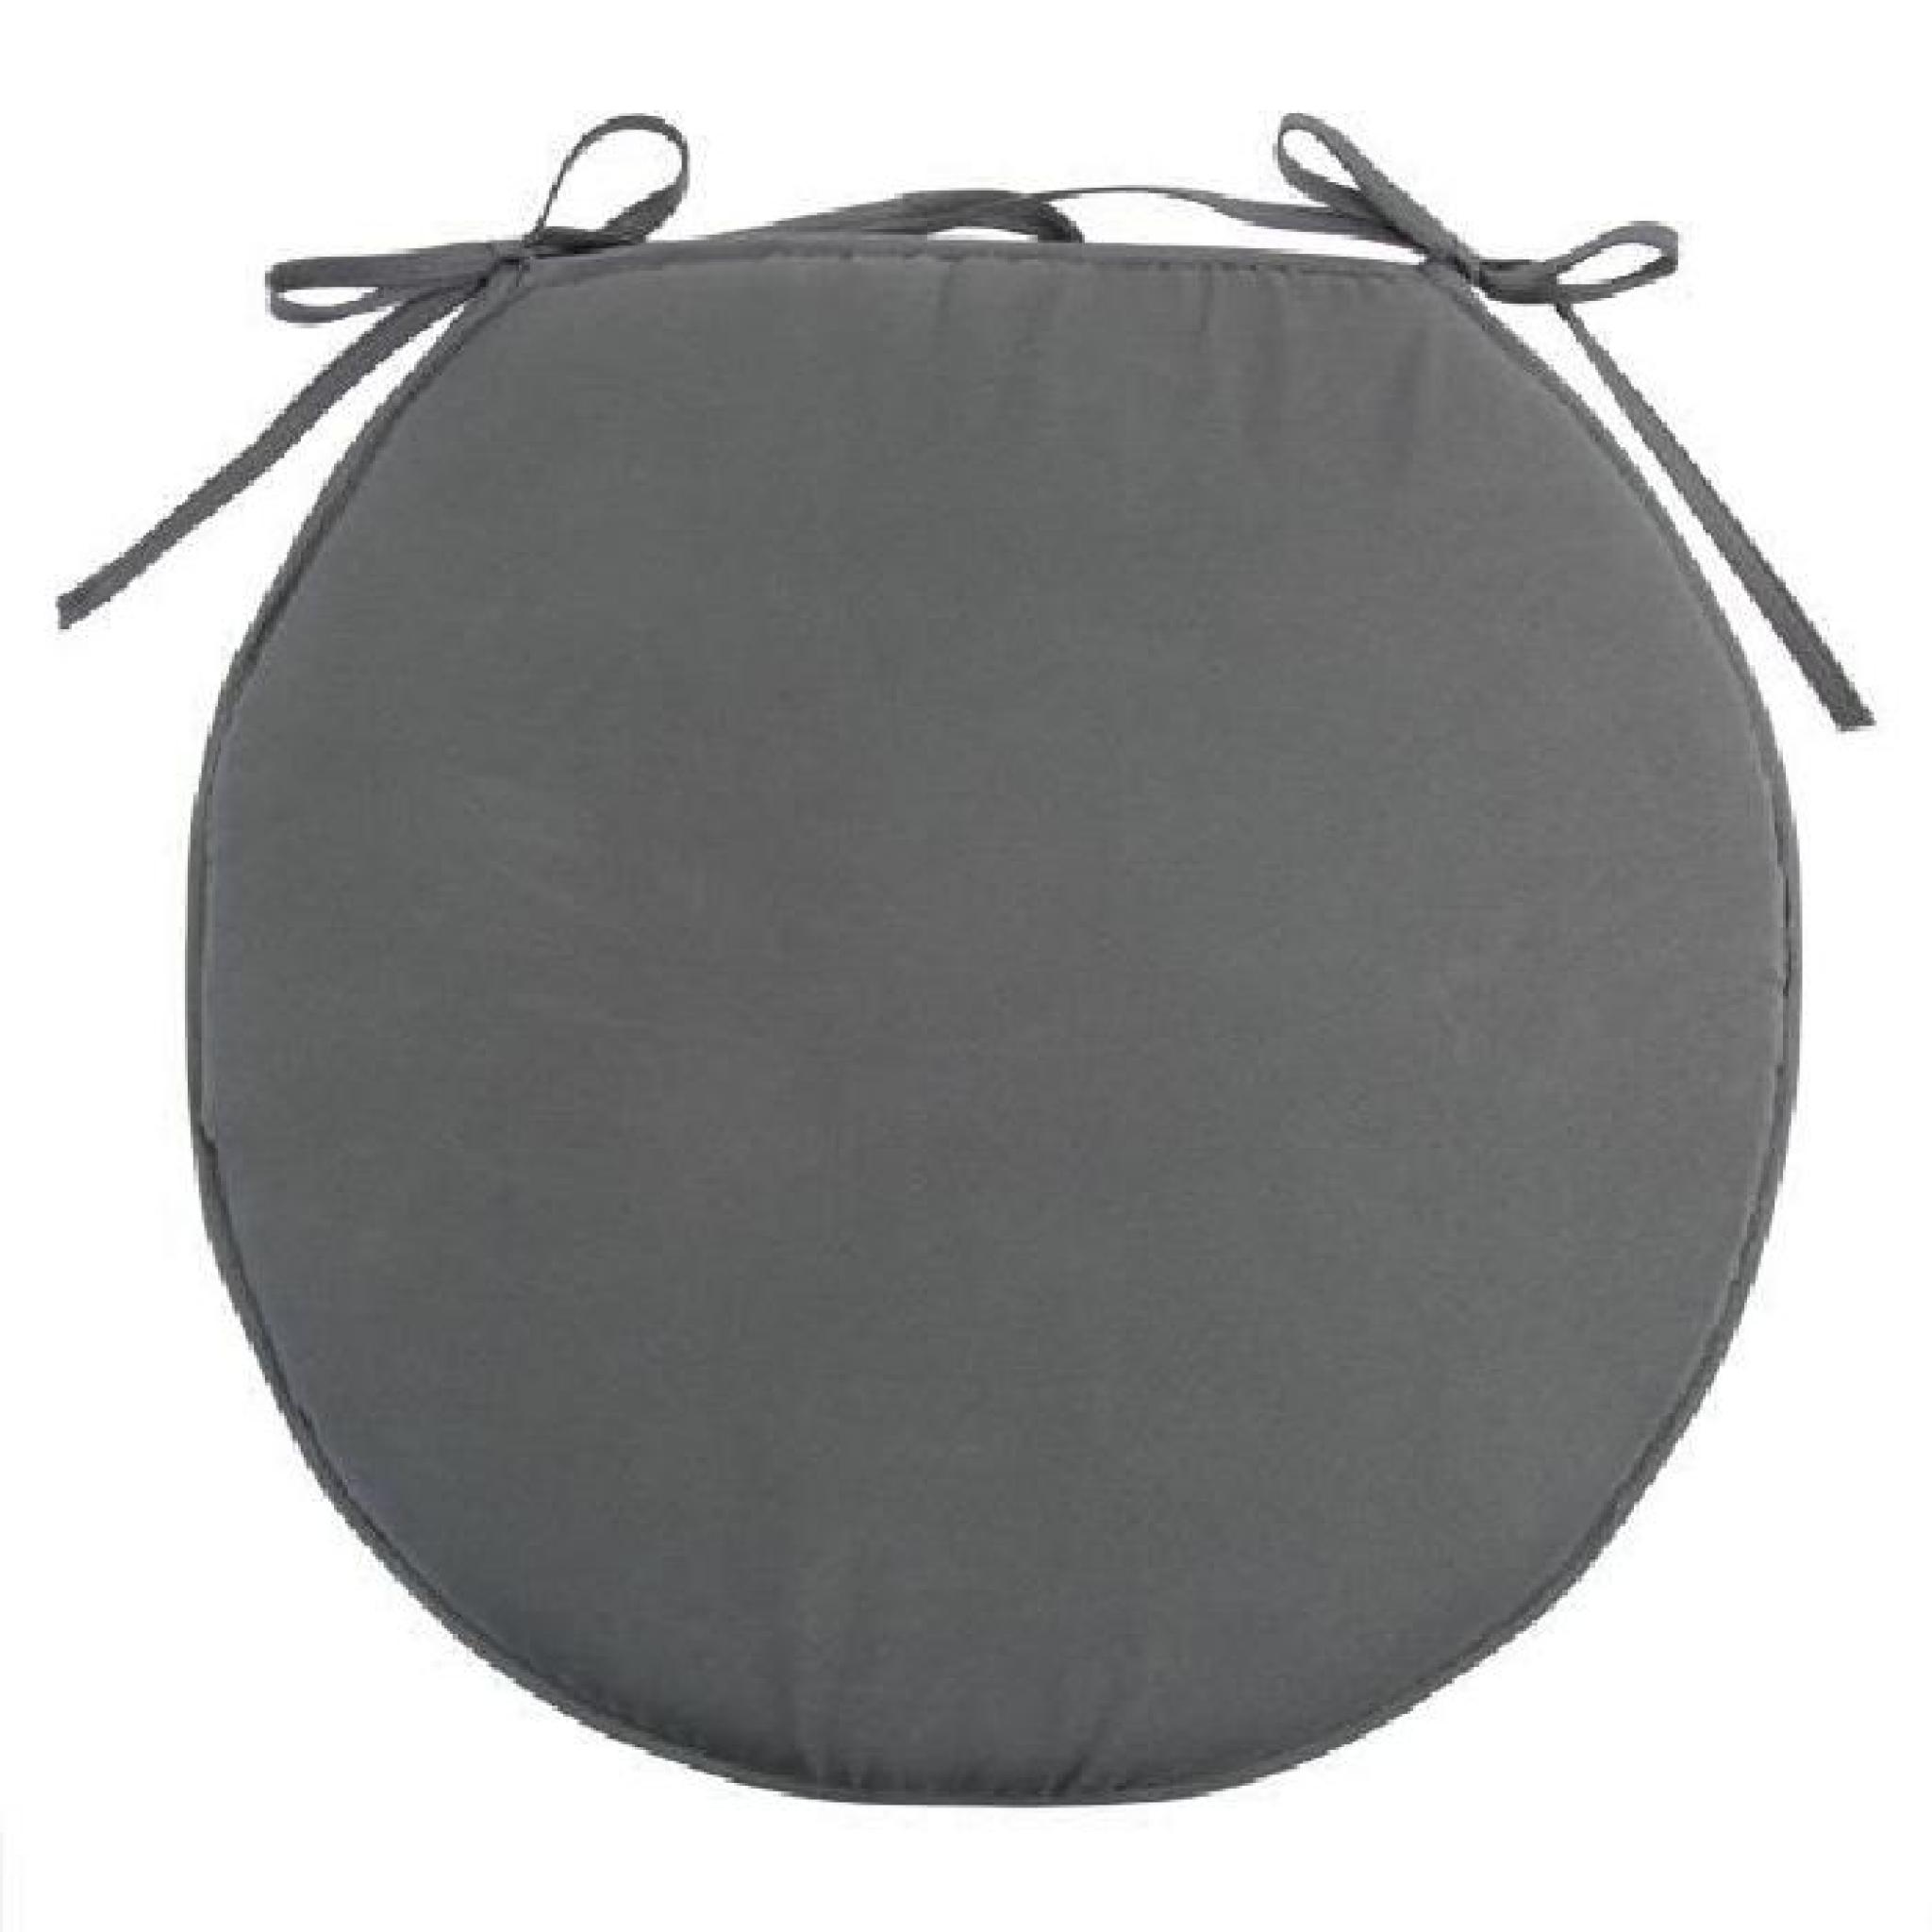 Galette de chaise ronde Gamme Nelson Gris anthracite